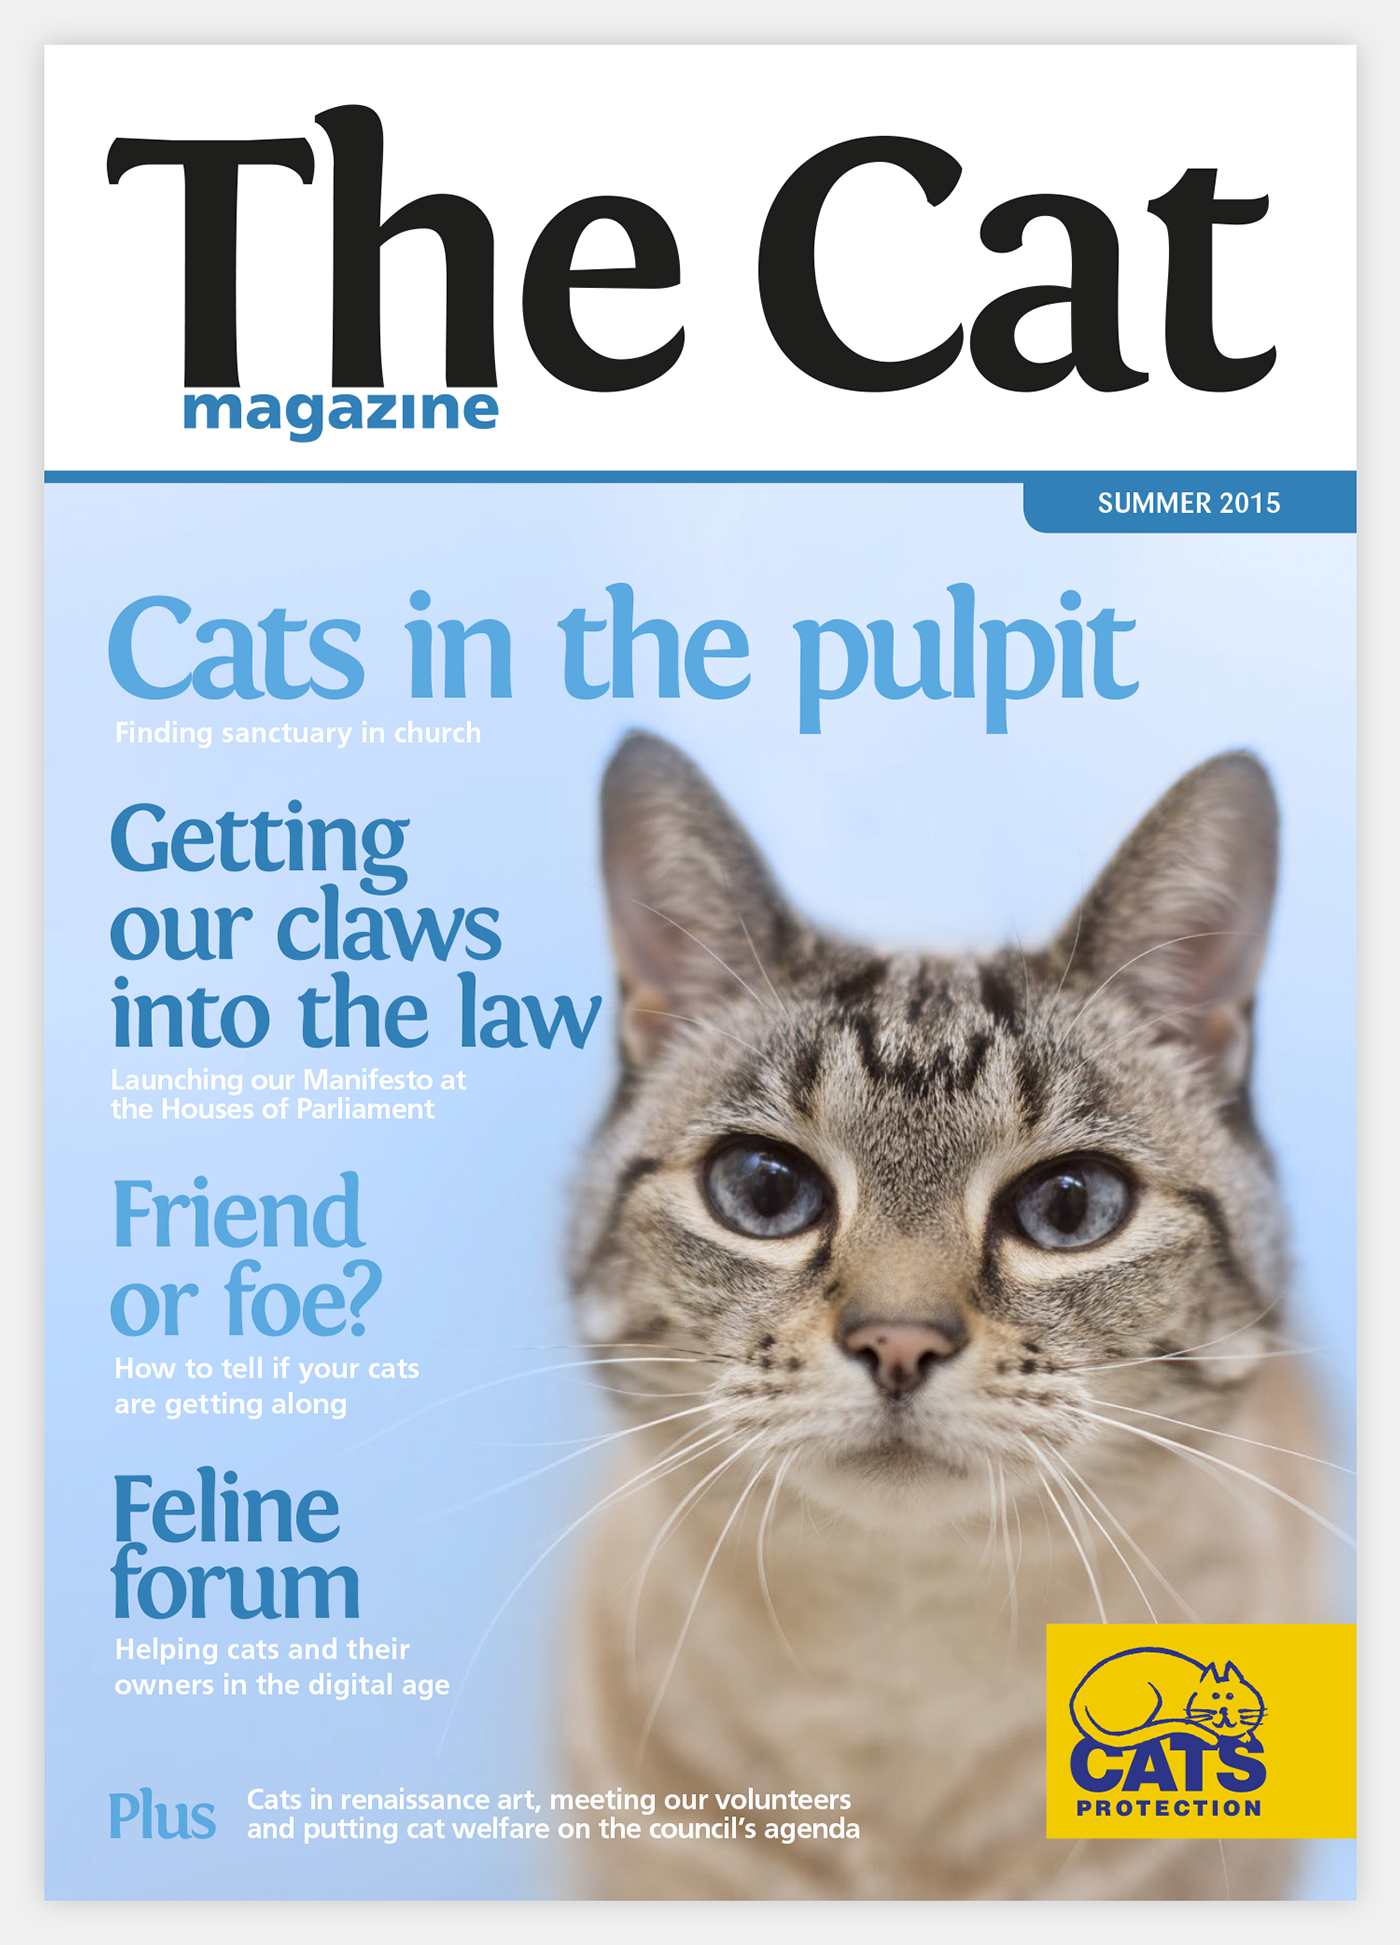 Cats Protection cats charity magazine editorial